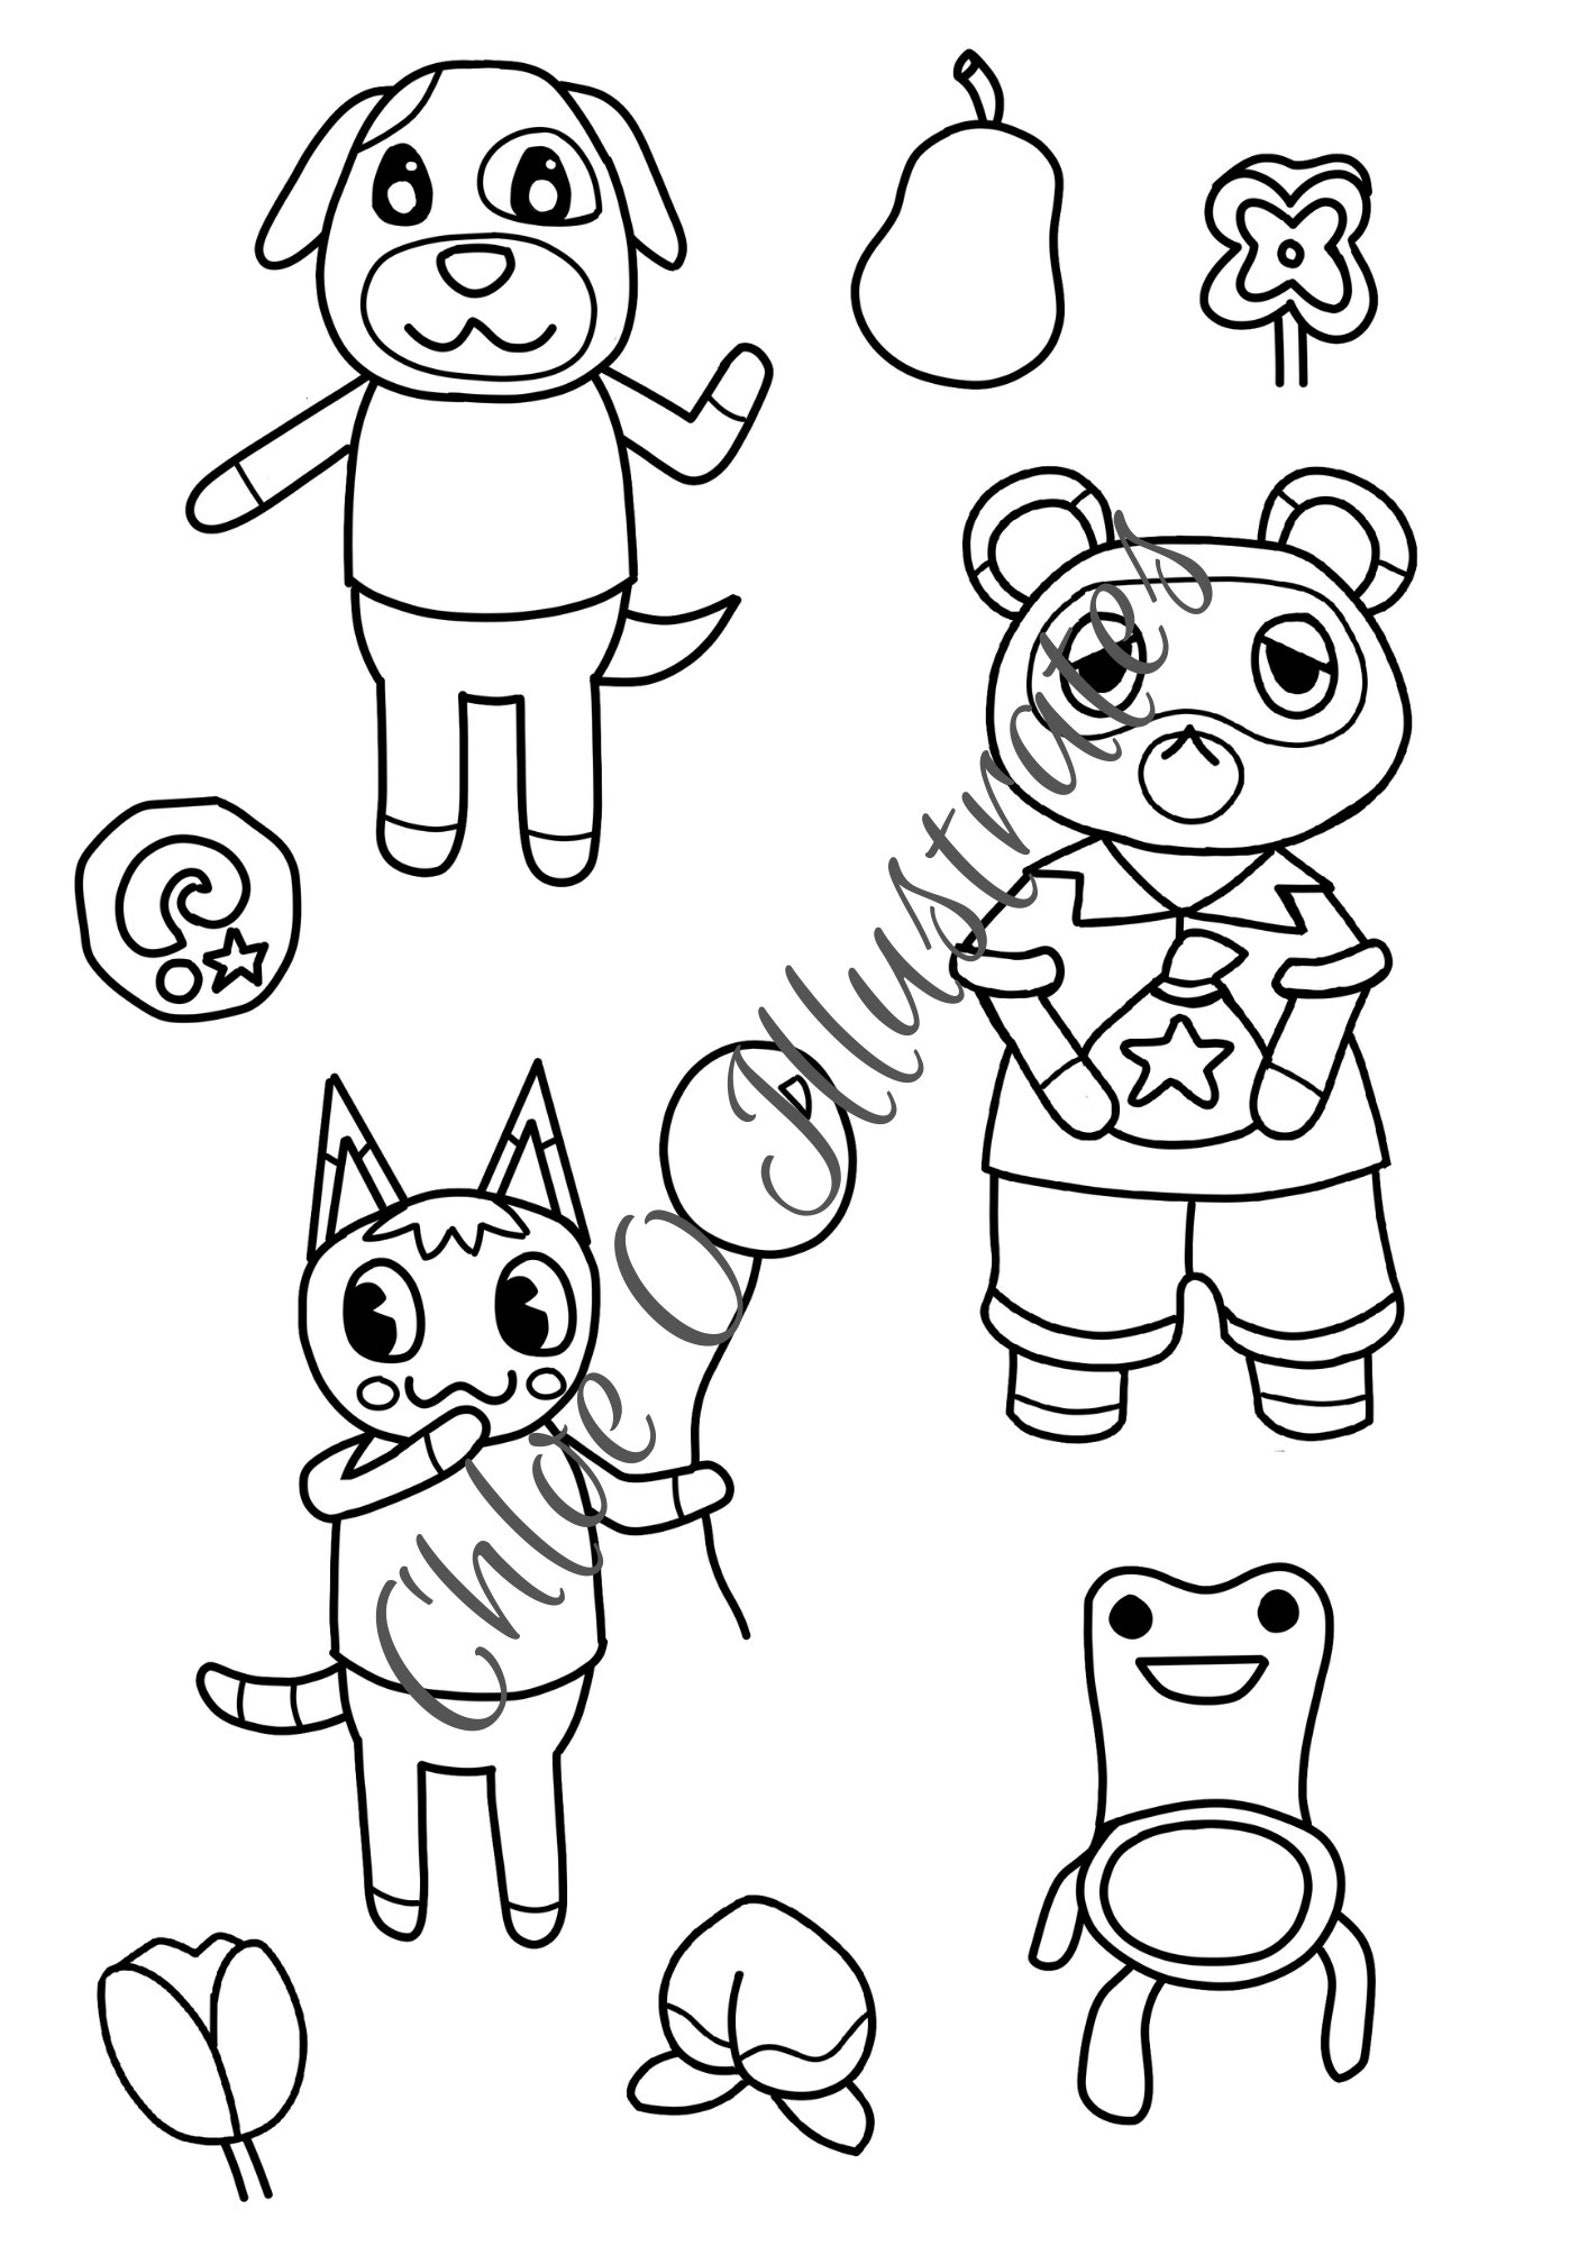 Animal Crossing Colouring Pages Digital Download - Etsy Australia